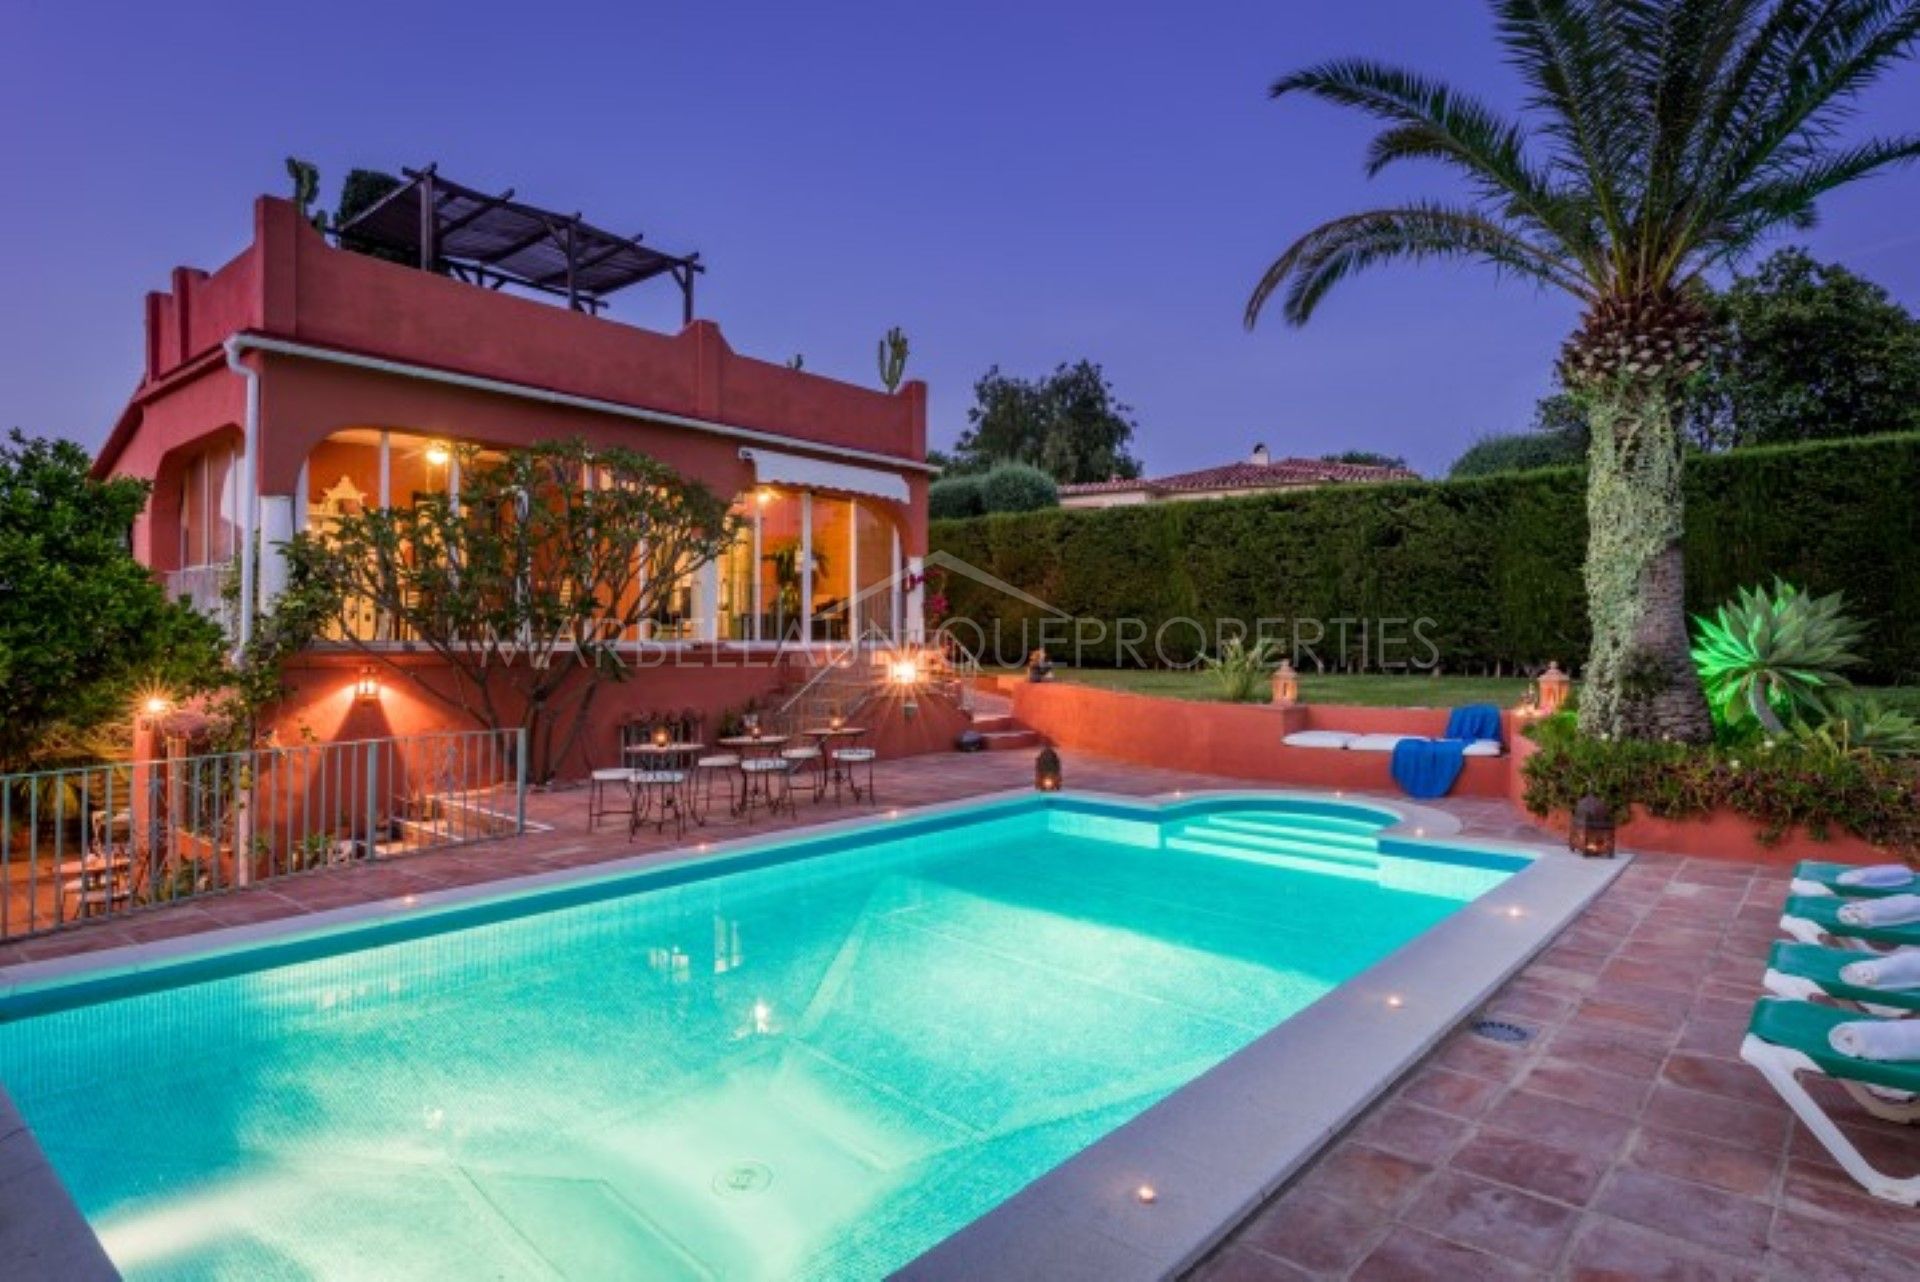 Andalusian style 7 bedroom villa in El Real Panorama